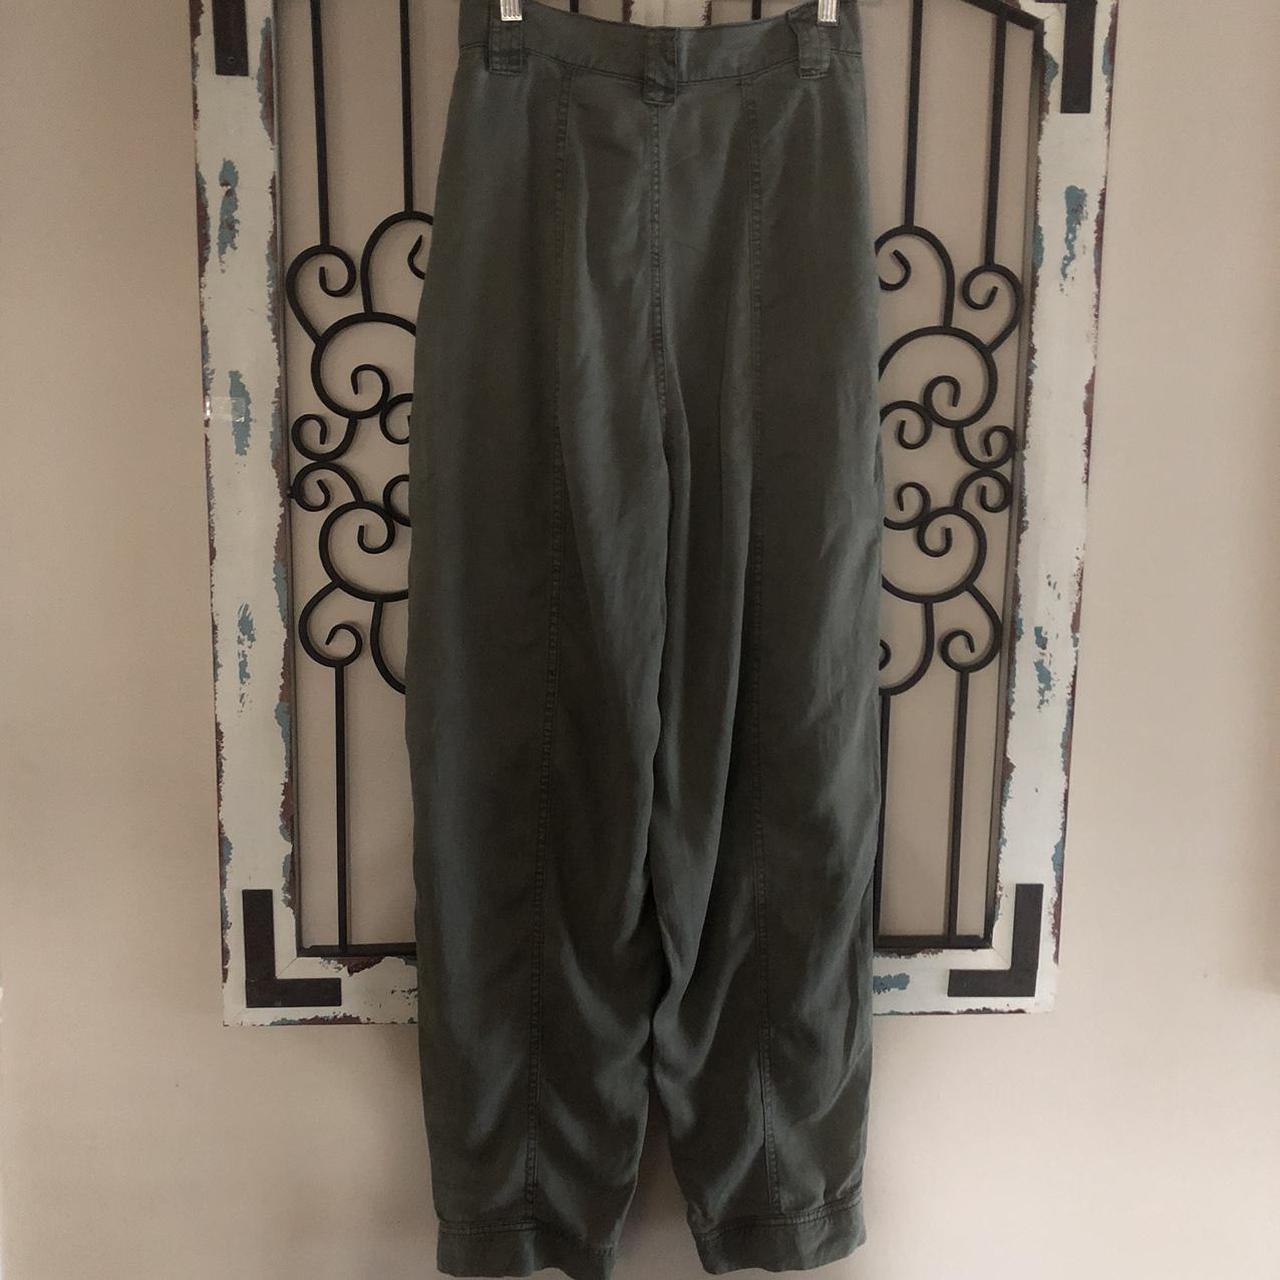 Urban Outfitters Women's Khaki and Green Trousers (3)